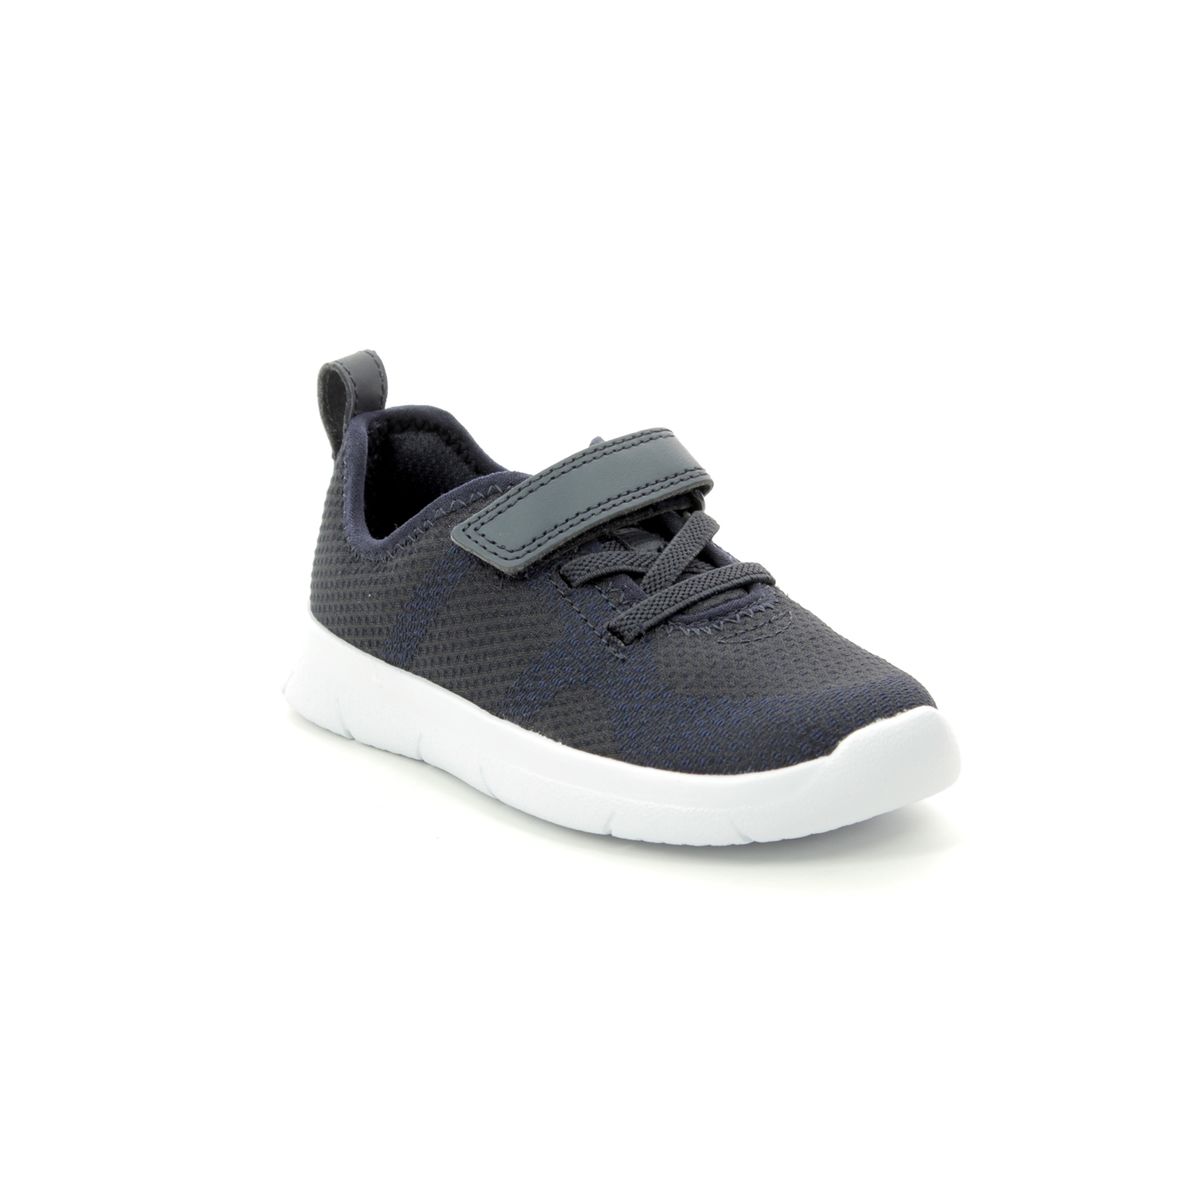 Clarks Ath Flux T Navy Kids Toddler Boys Trainers 4126-96F in a Plain Textile in Size 4.5